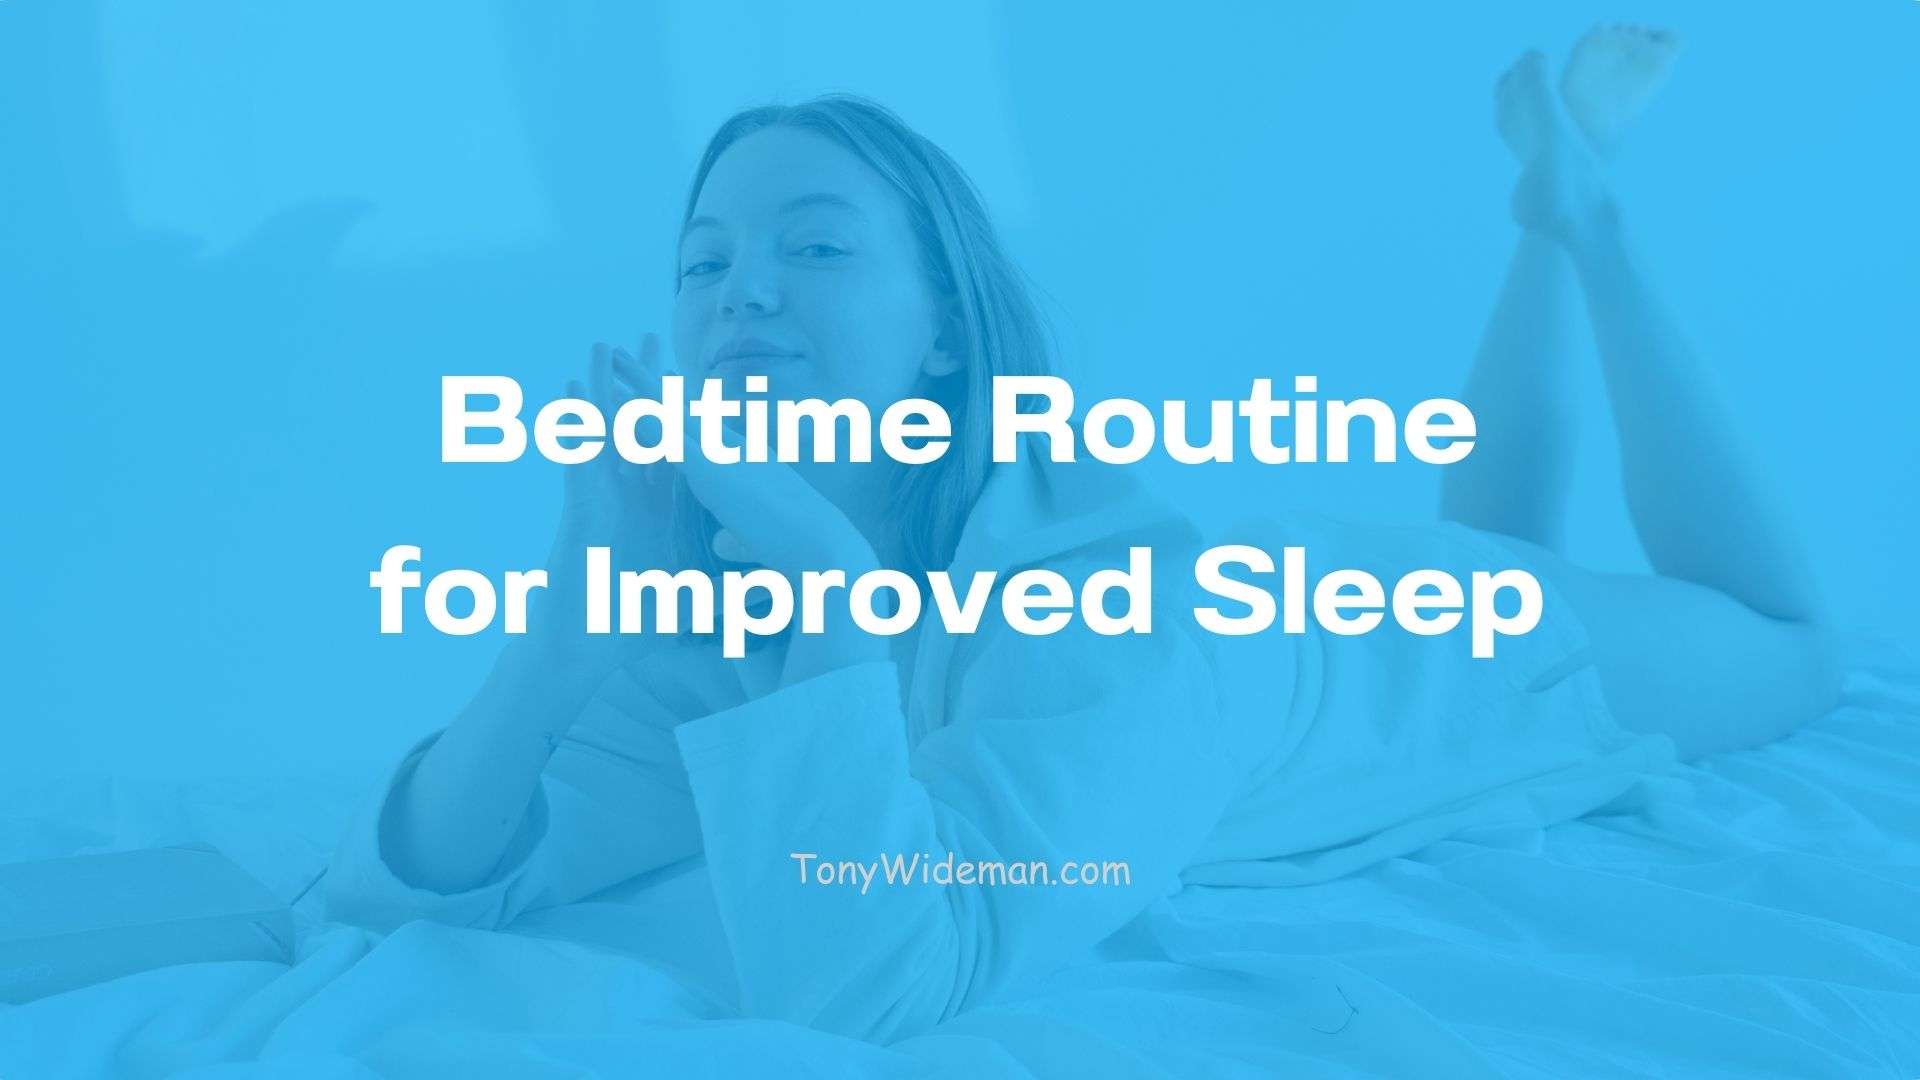 Bedtime Routine for Improved Sleep